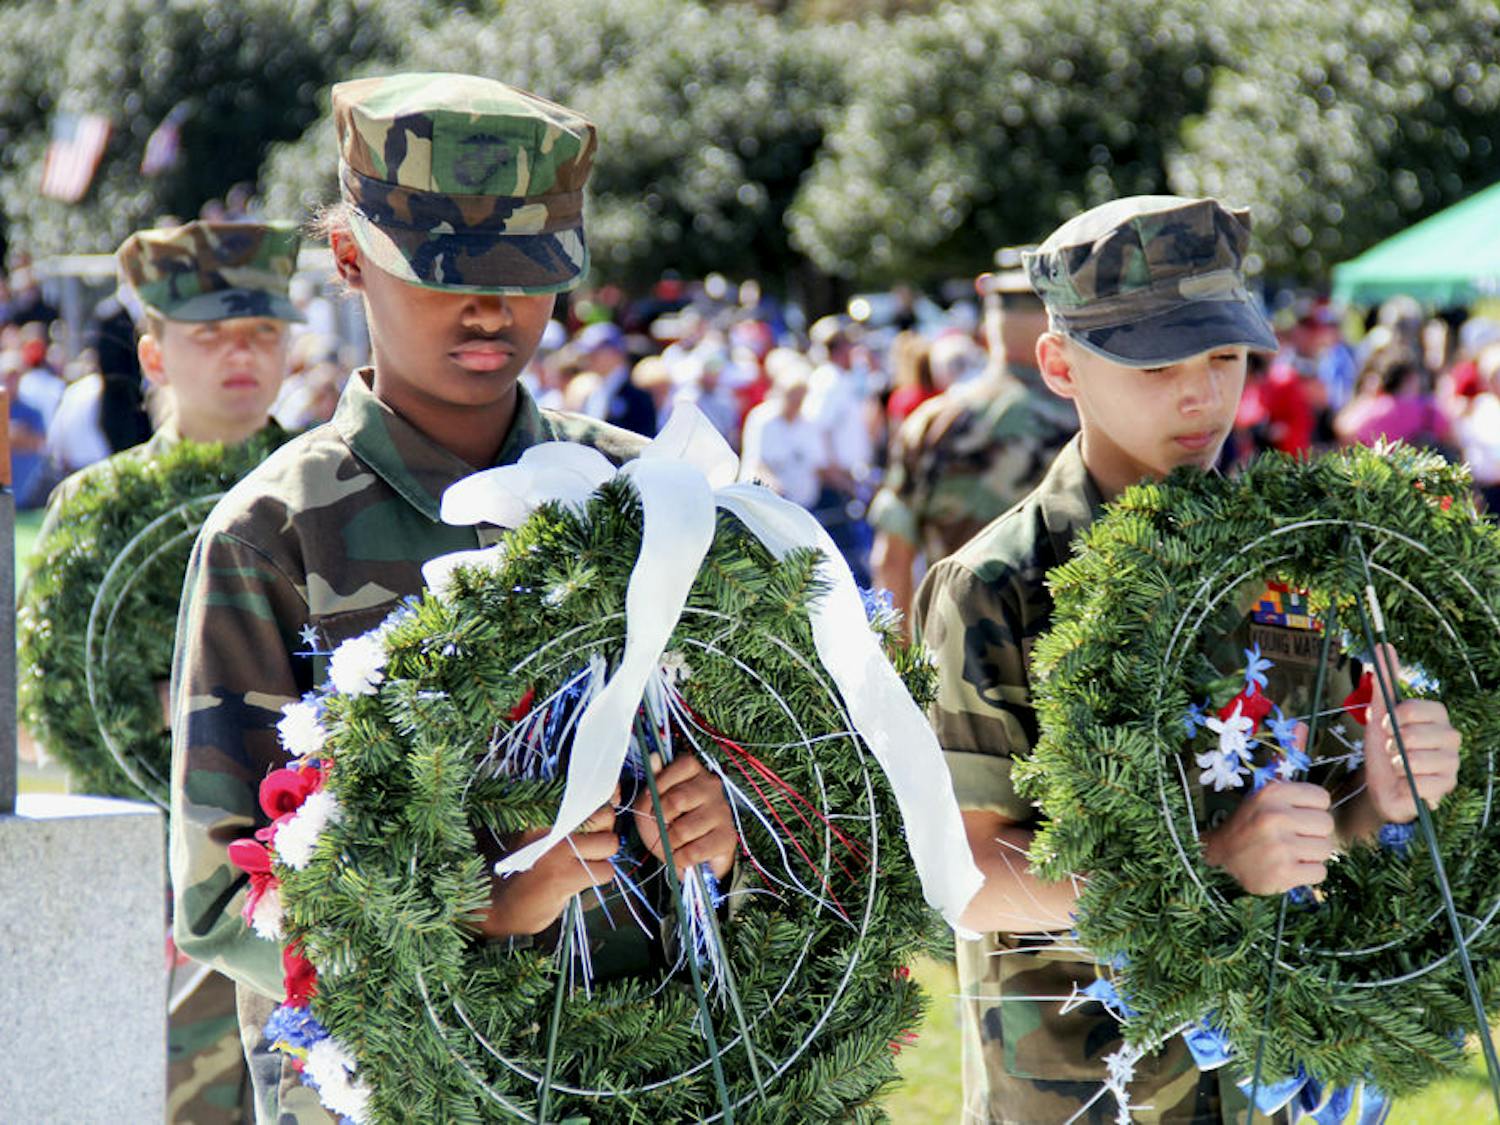 Nine-year-olds Recruit Jacqueline Gaston and Pvt. Dylan Russell, along with fellow cadets from the Milton Lewis Young Marines, return wreaths back to their rightful places.